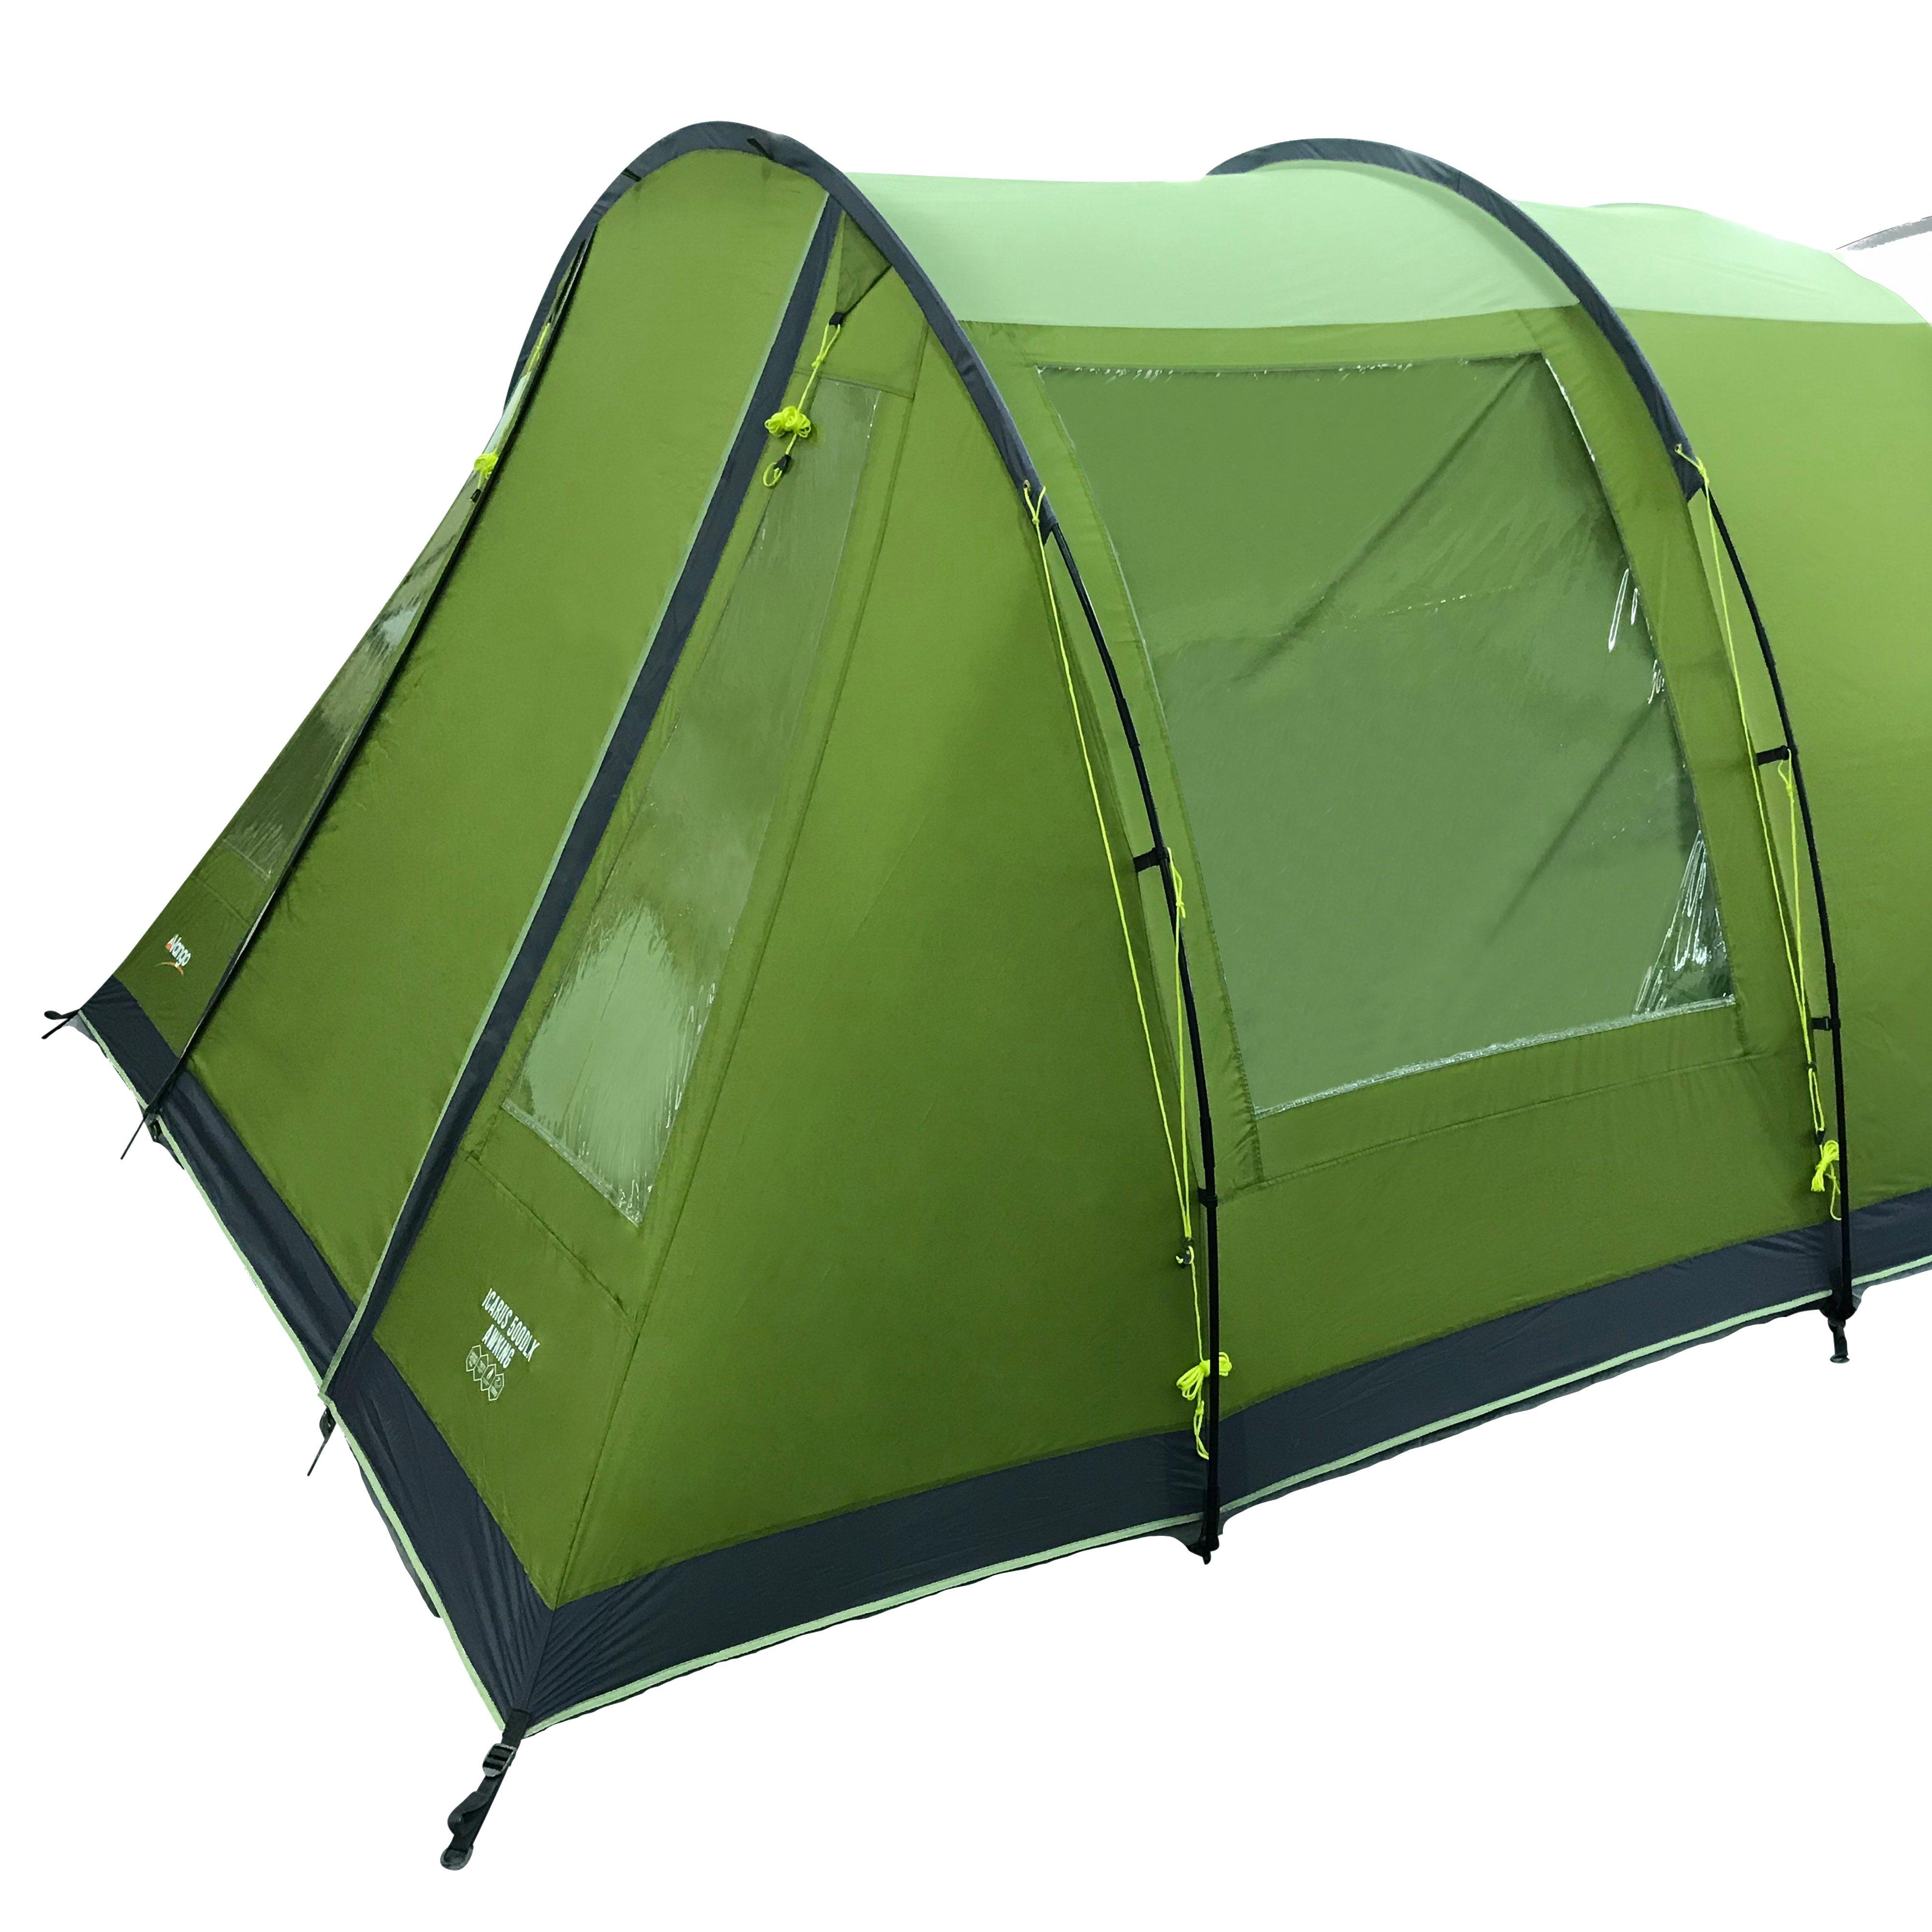 Vango Icarus 500 DLX Tent Awning Review